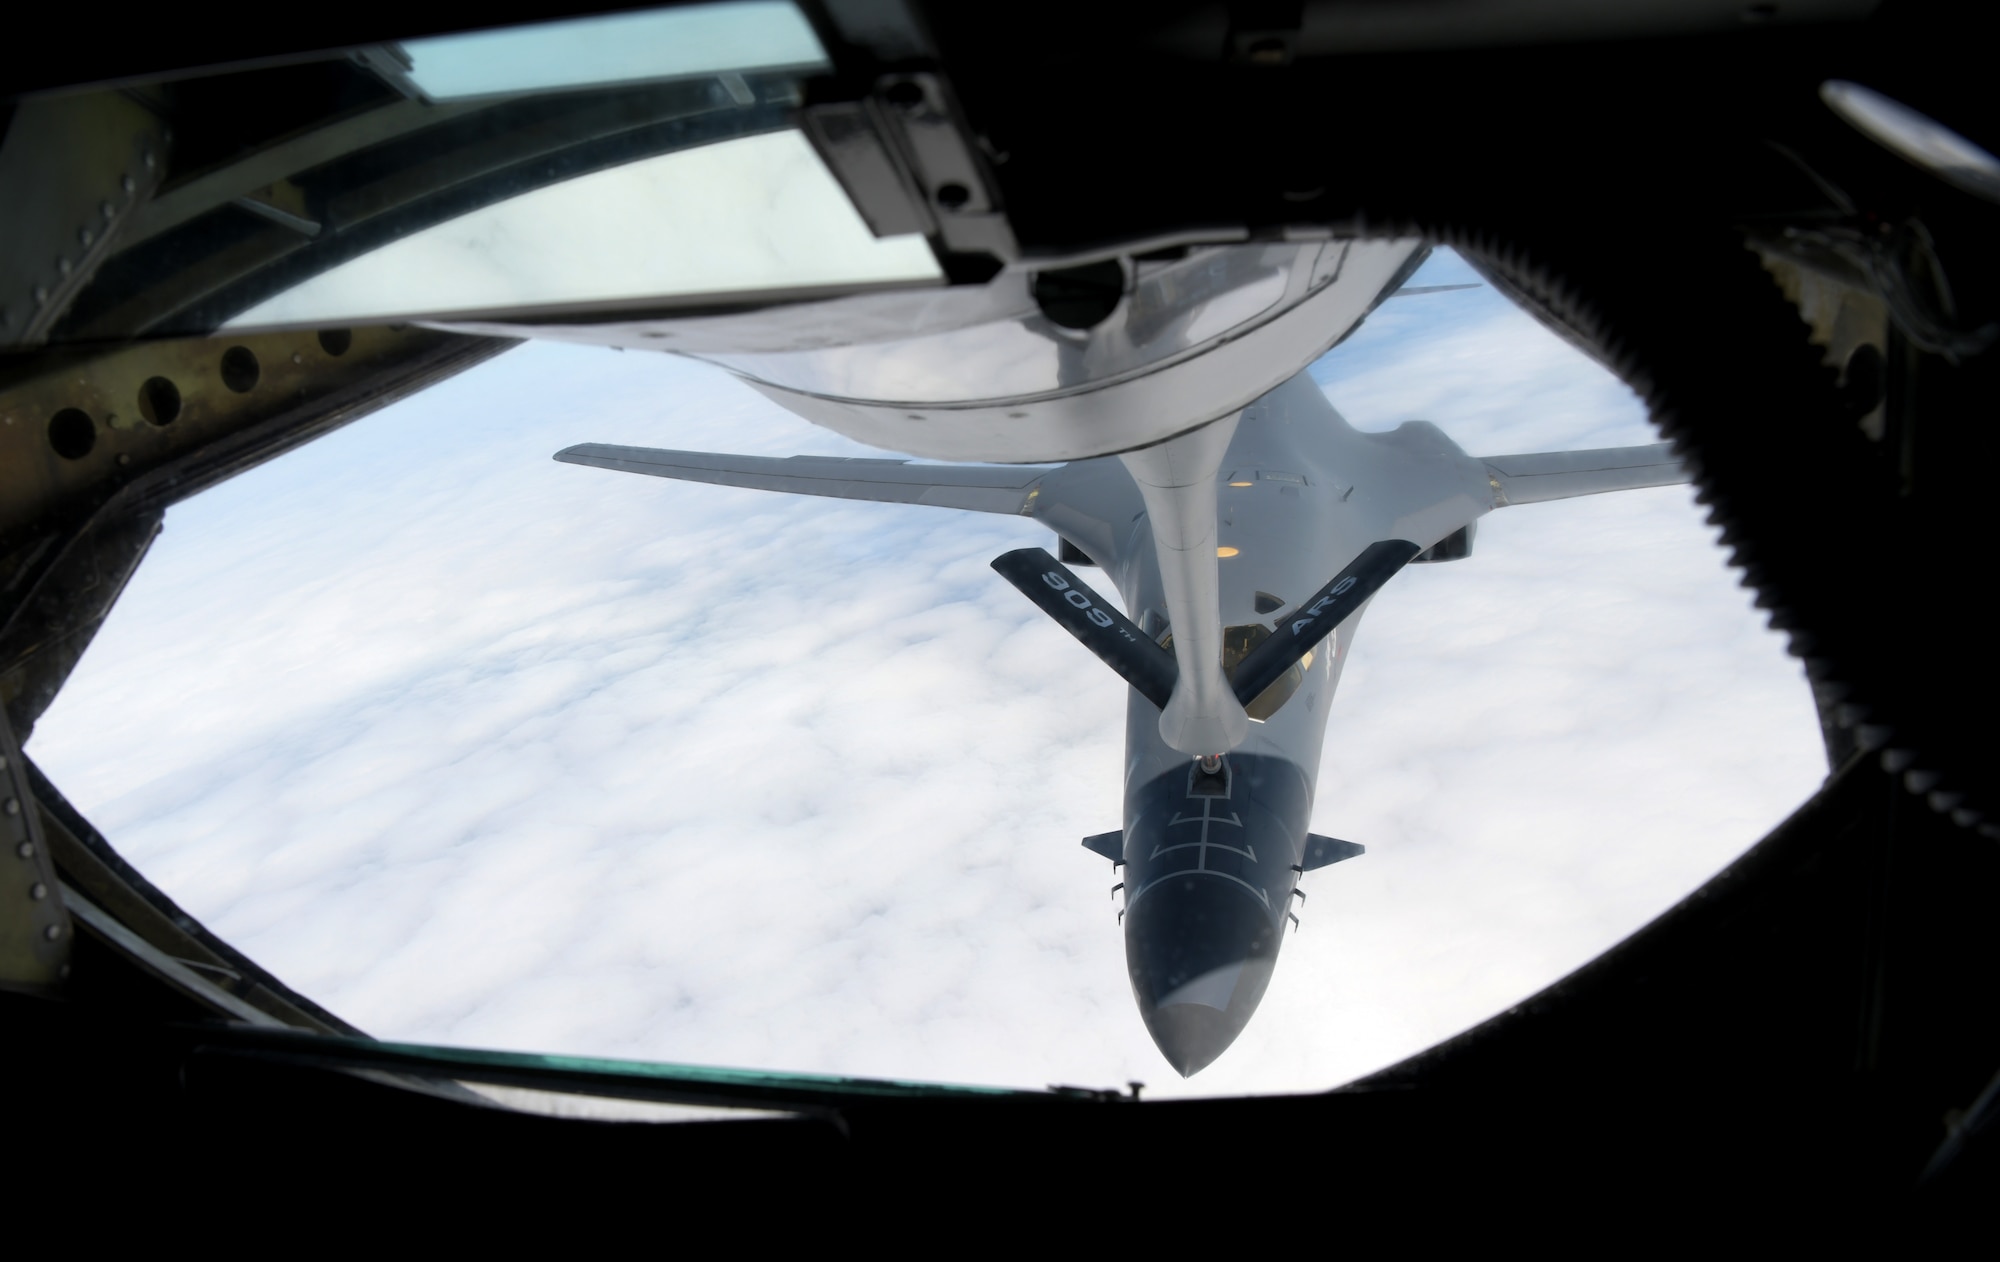 A U.S. Air Force B-1B Lancer from the 28th Bomb Wing, Ellsworth Air Force Base, S.D., approaches a KC-135 Stratotanker from the 909th Air Refueling Squadron, to refuel over the Pacific as part of a bilateral U.S. Indo-Pacific Command and U.S. Strategic Command (USSTRACTCOM) Bomber Task Force (BTF) mission July 17, 2020.  This operation demonstrates the U.S. Air Force’s dynamic force employment model in line with the National Defense Strategy’s objectives of strategic predictability with persistent bomber presences, assuring allies and partners. (U.S. Air Force photo by Airman 1st Class Rebeckah Medeiros)